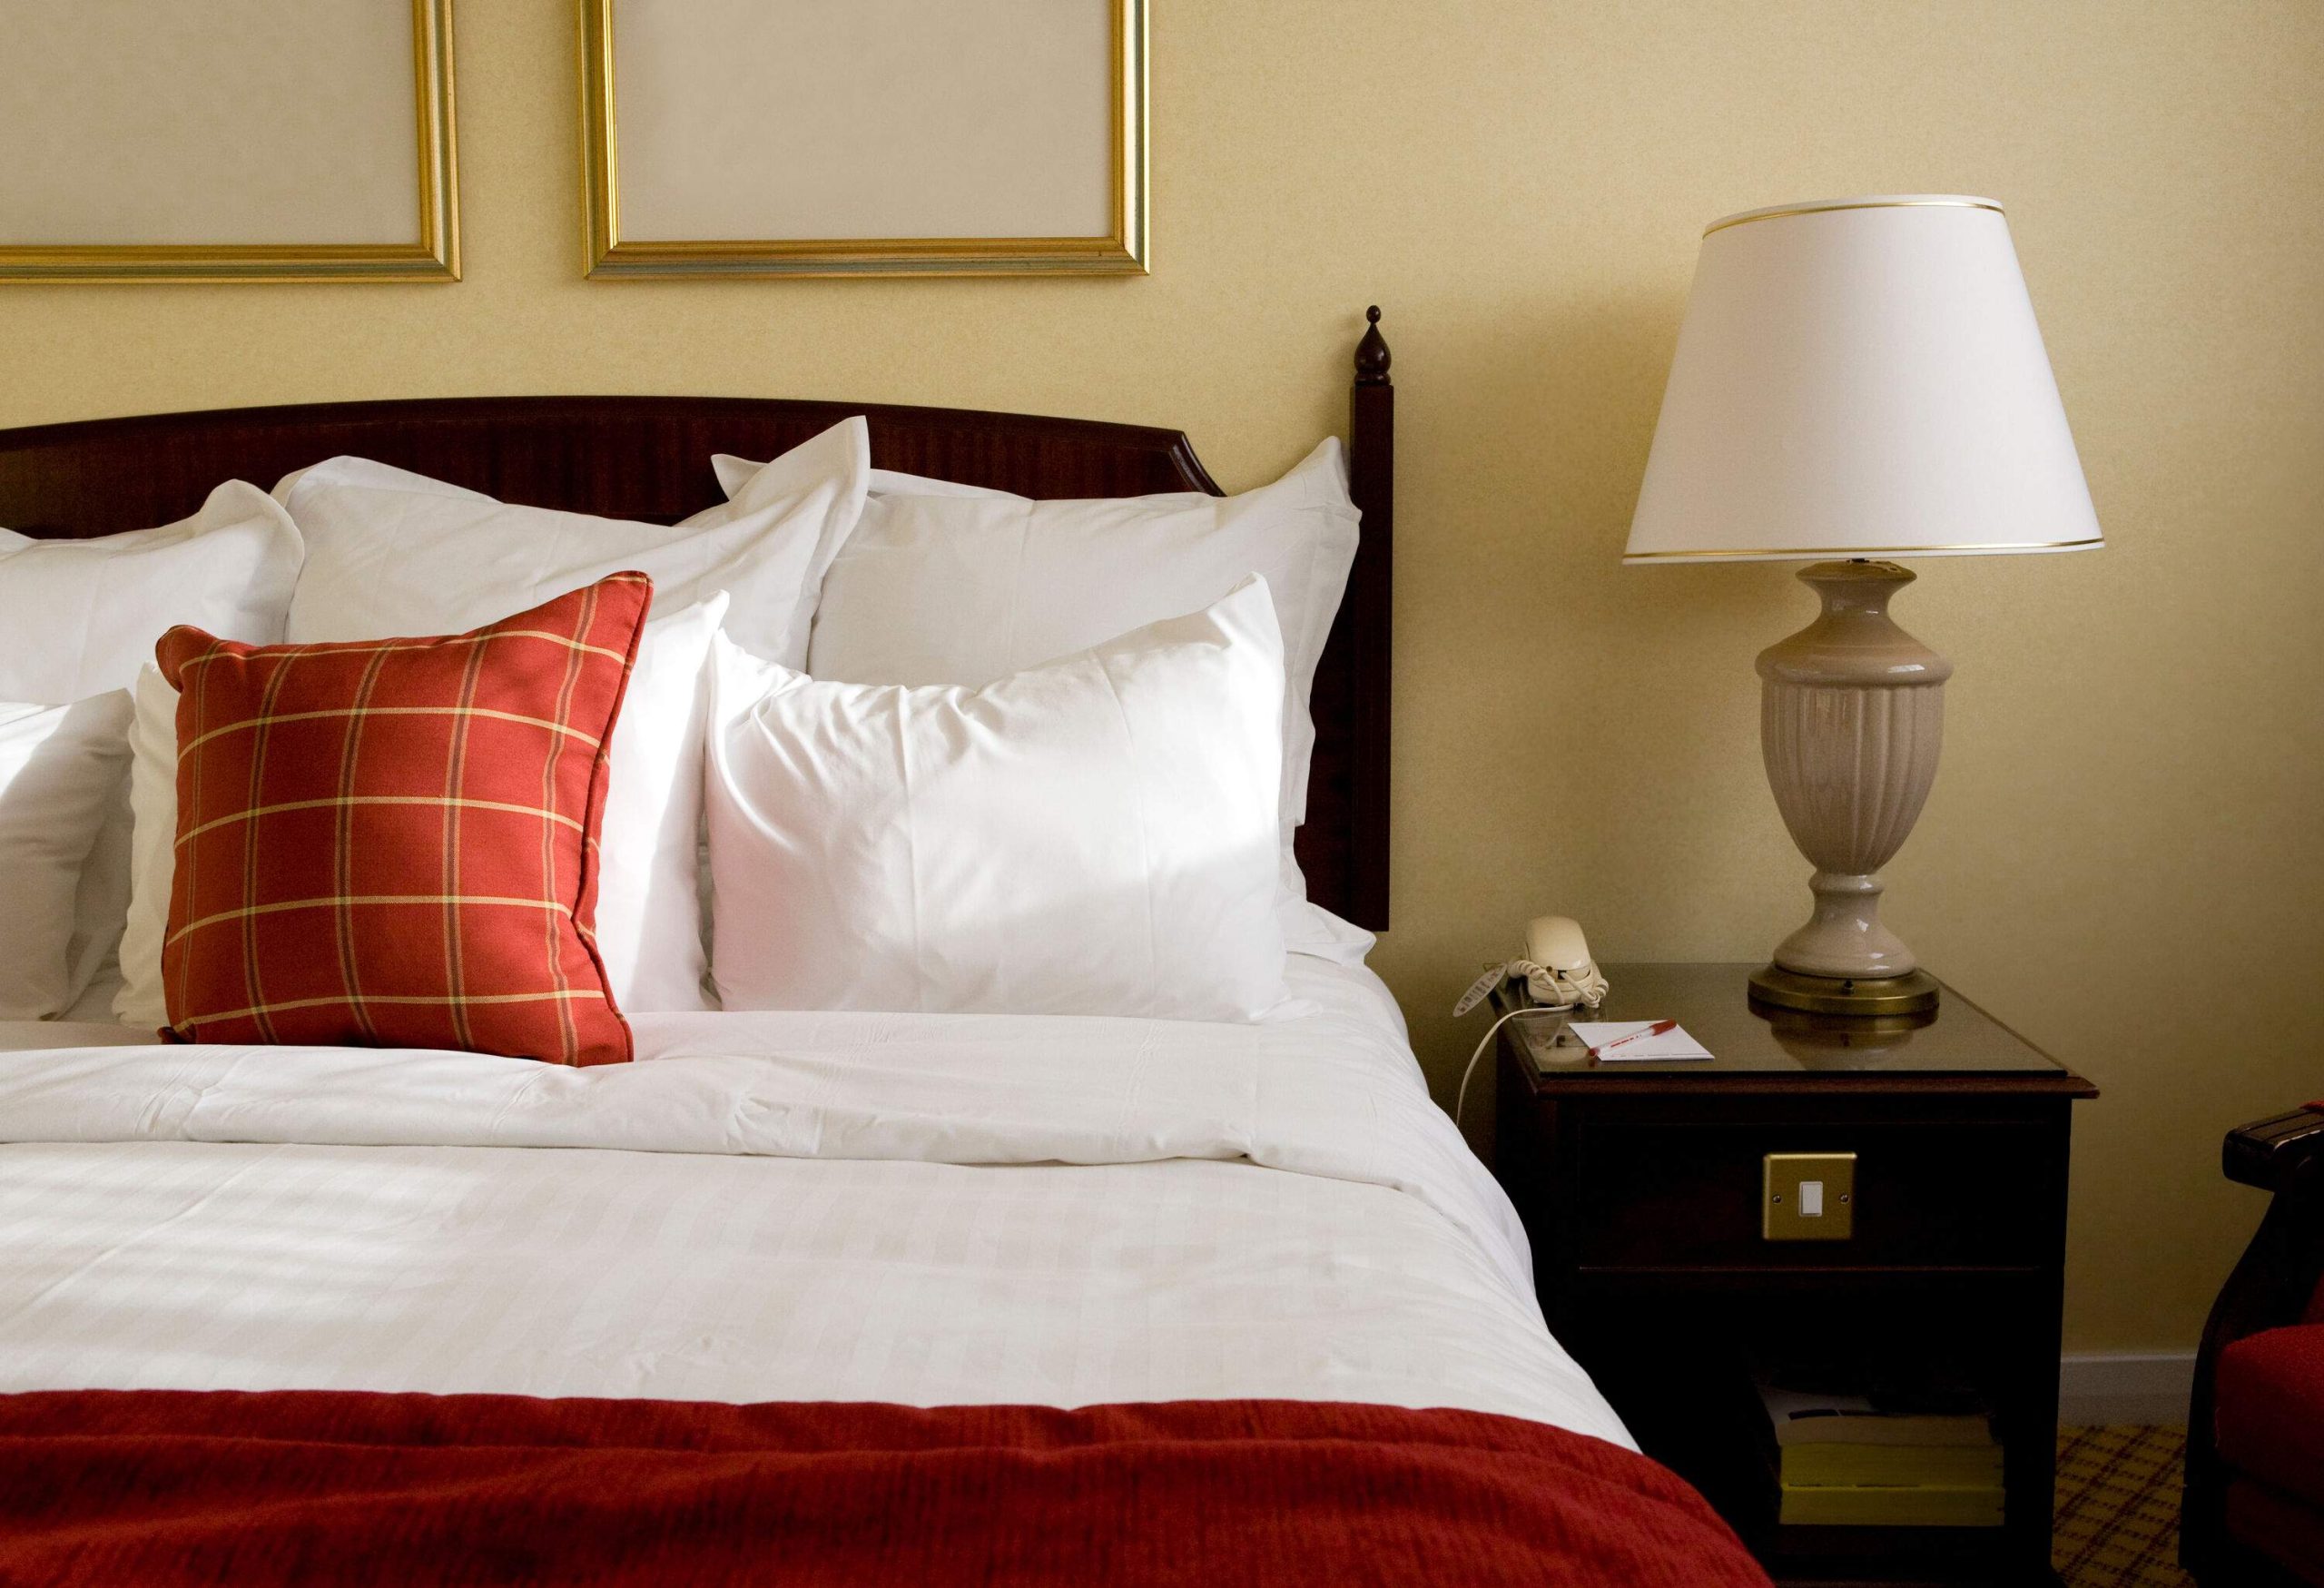 A bed with white linens and a red accent alongside a wooden table with a lamp and a wired phone